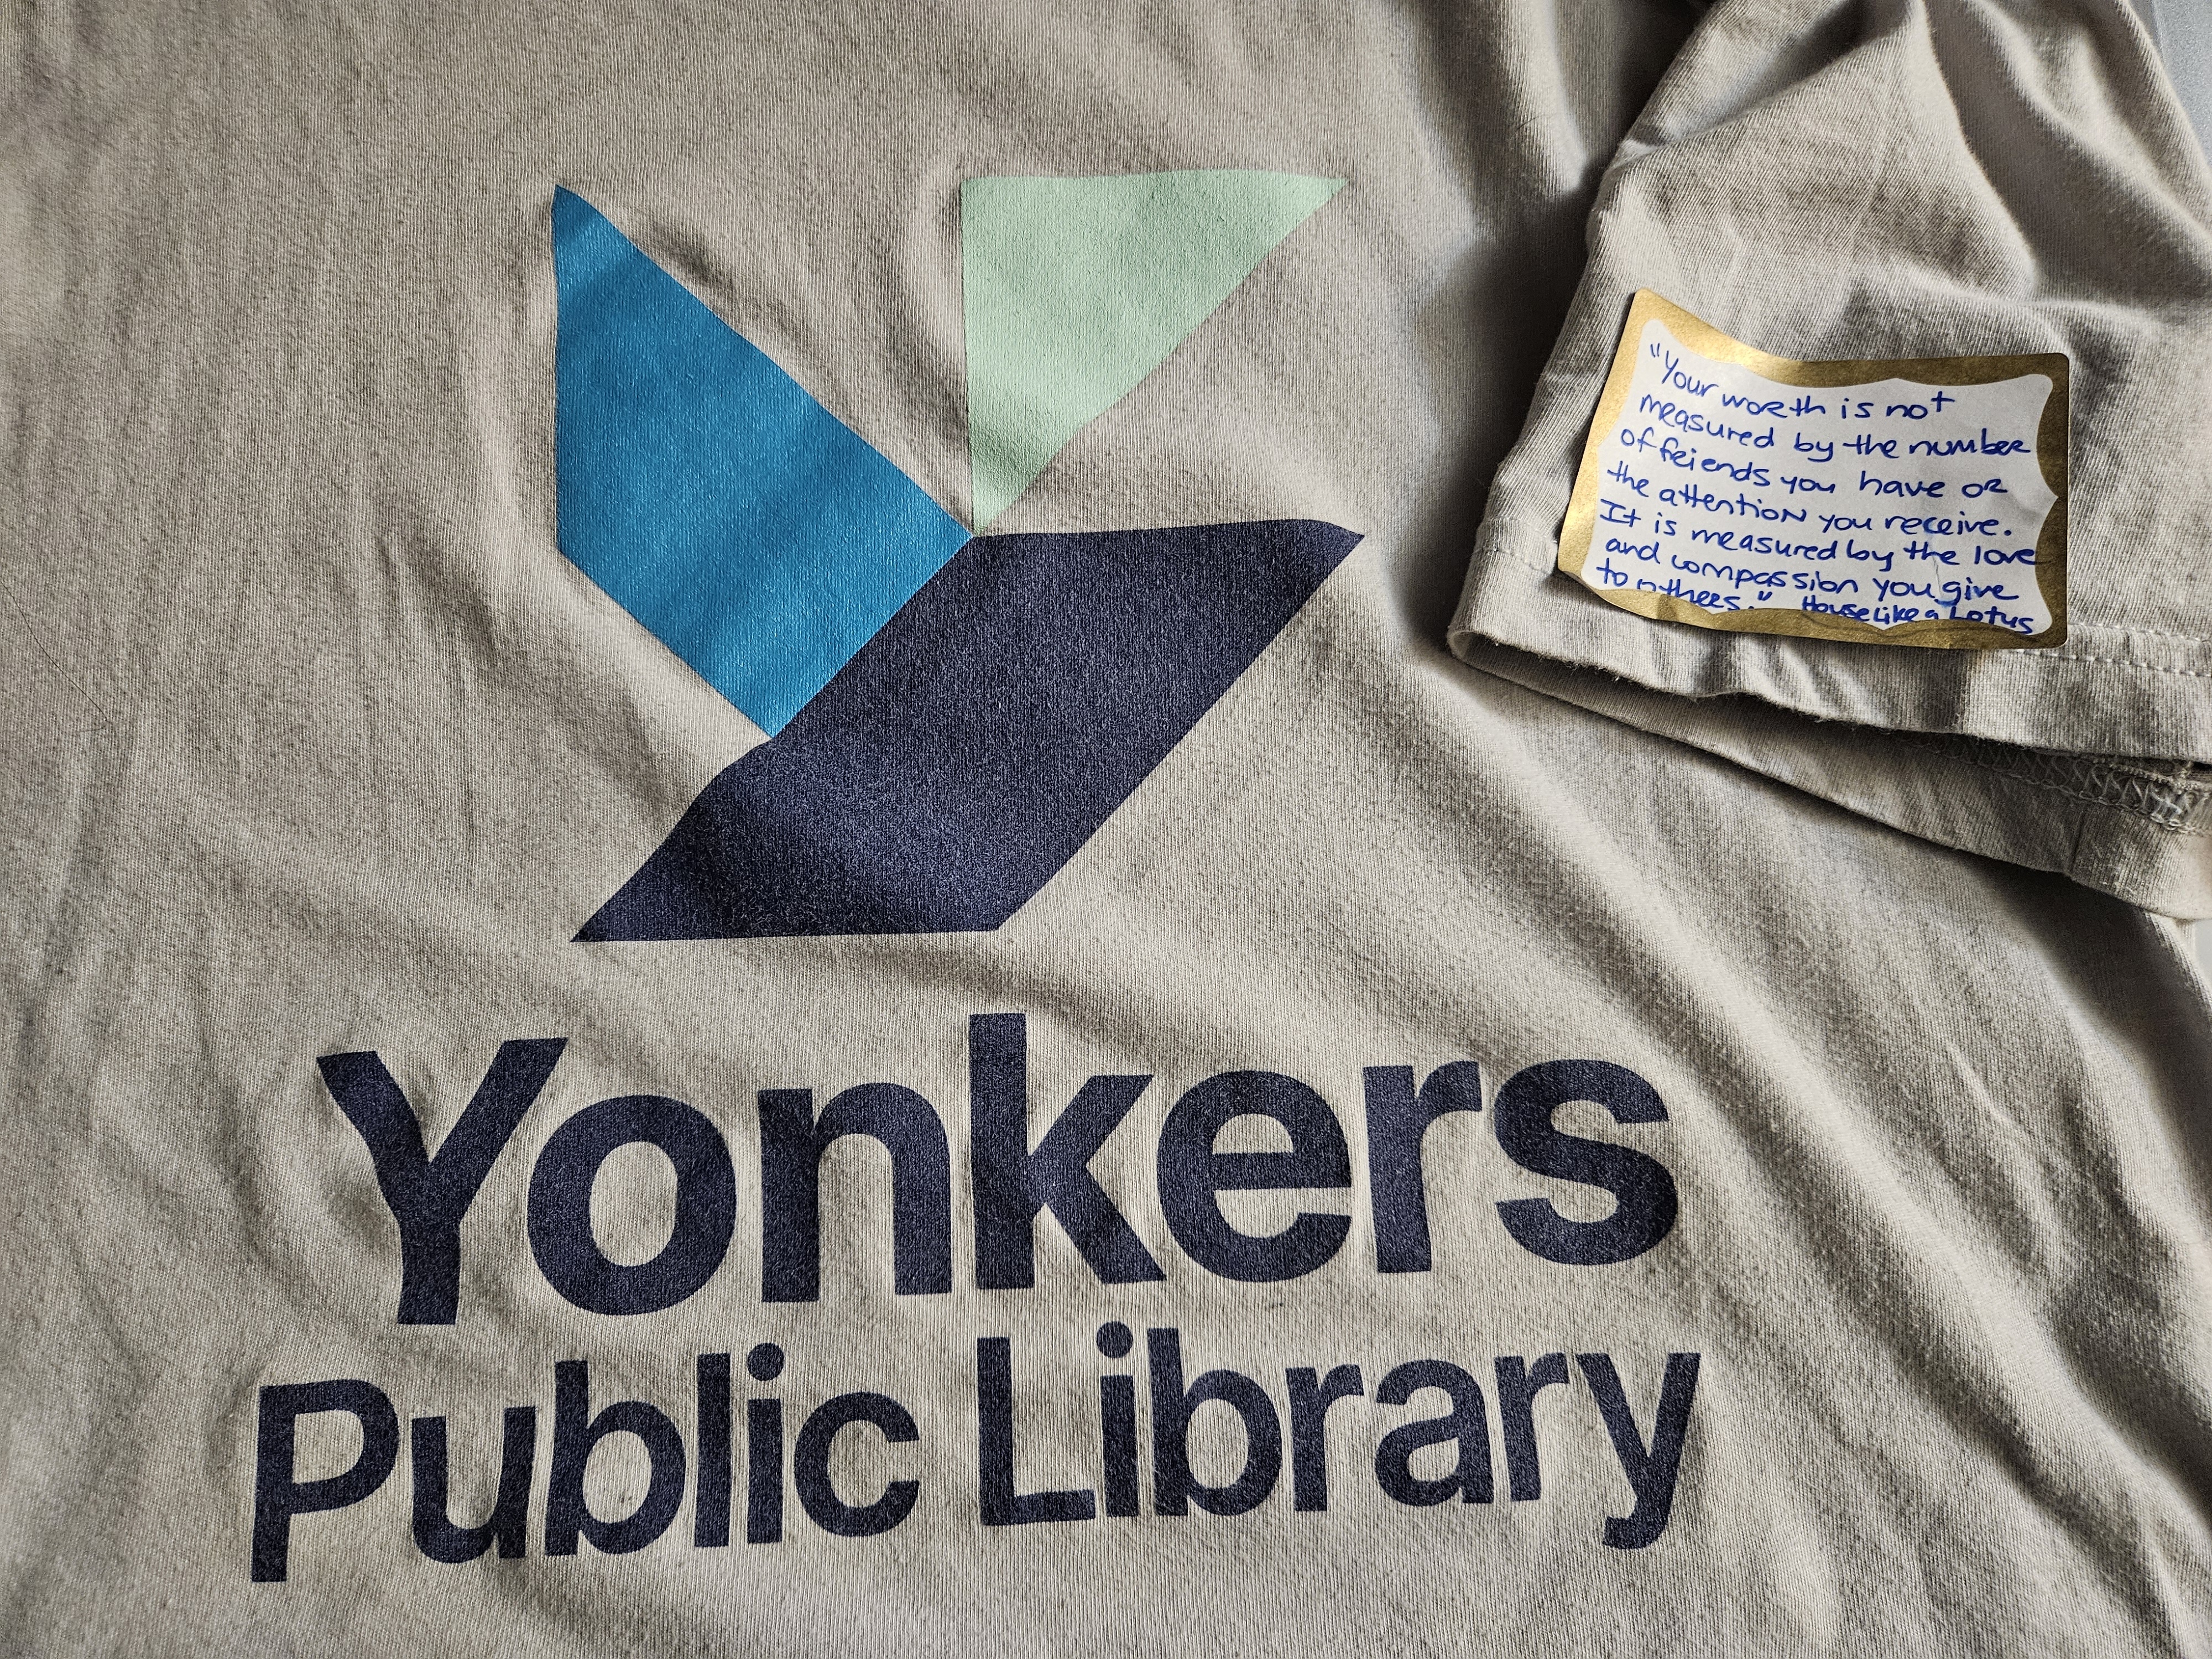 The Yonkers Public Library staff t-shirt with a book quote sticker on the sleeve.